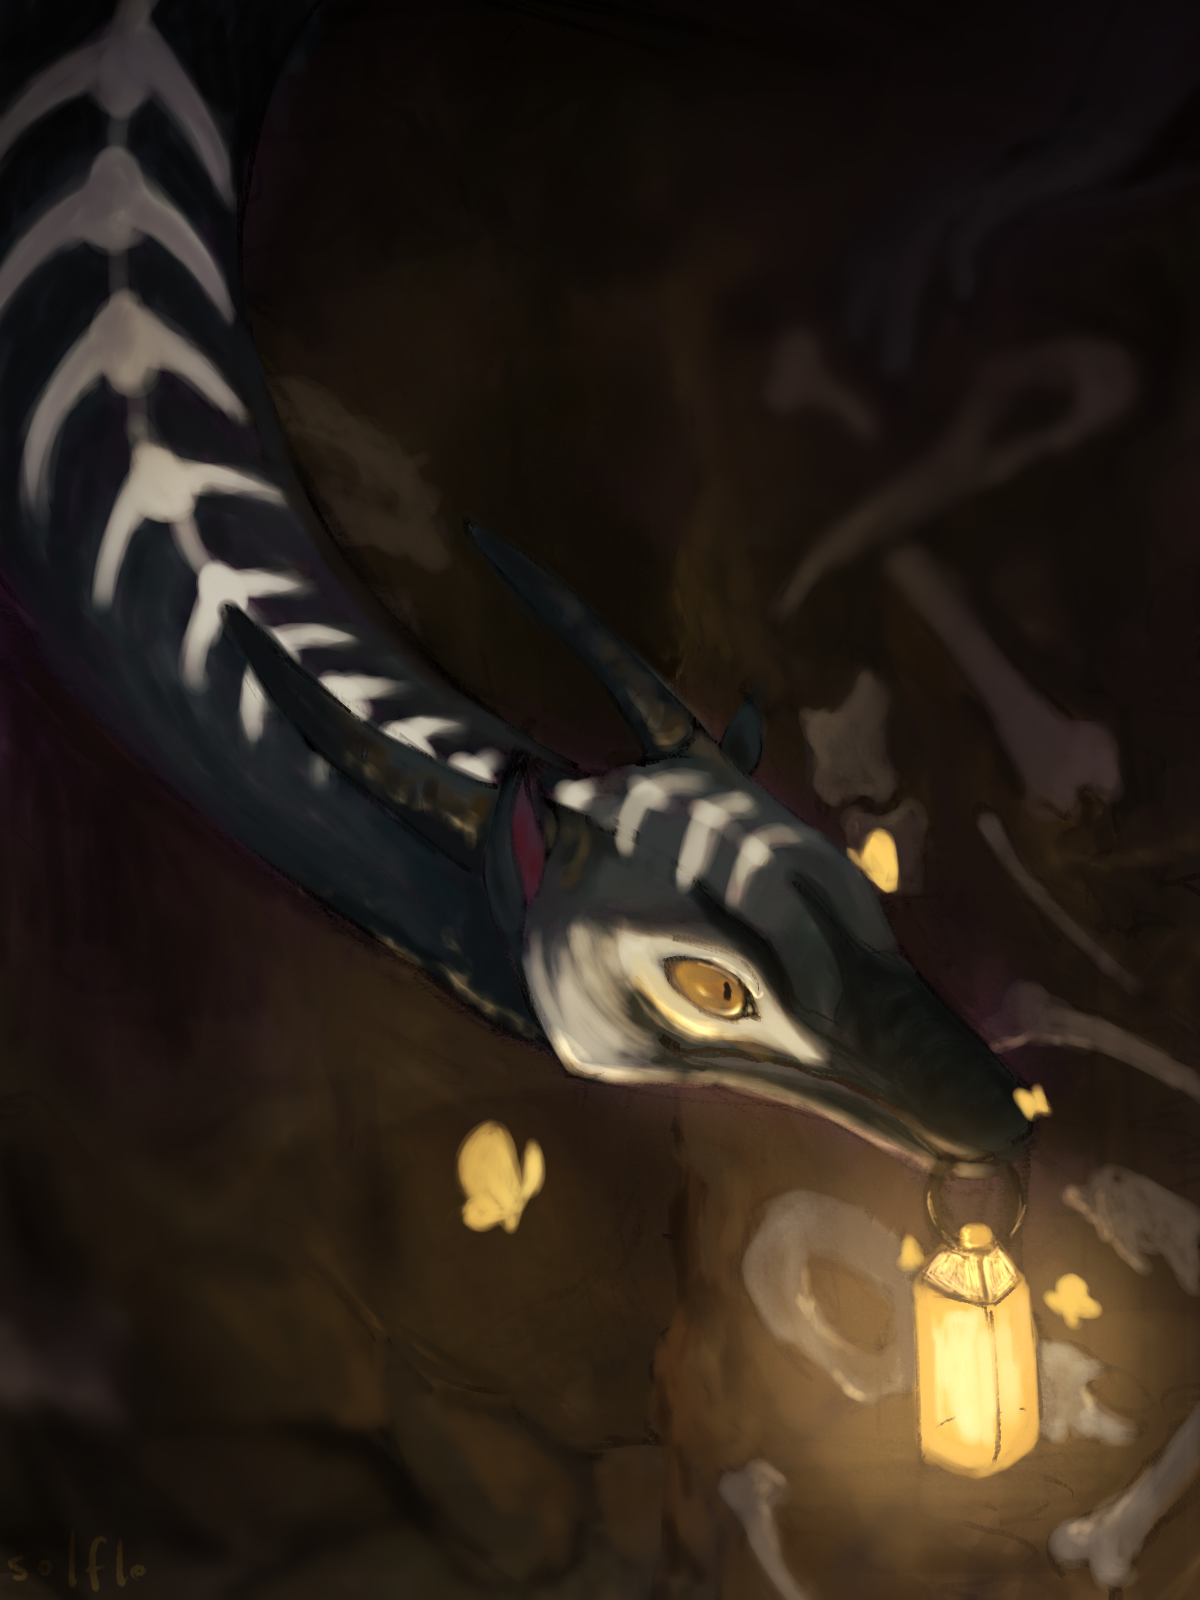 digital portrait painting of a spiral dragon from flight rising. the dragon is bluish-gray with white markings resembling vertebra. he holds a yellow lantern on his mouth, surrounded by butterflies of the same color, and looks off the frame with an alert expression. the background is a cave with skulls and other bones embedded in the rock